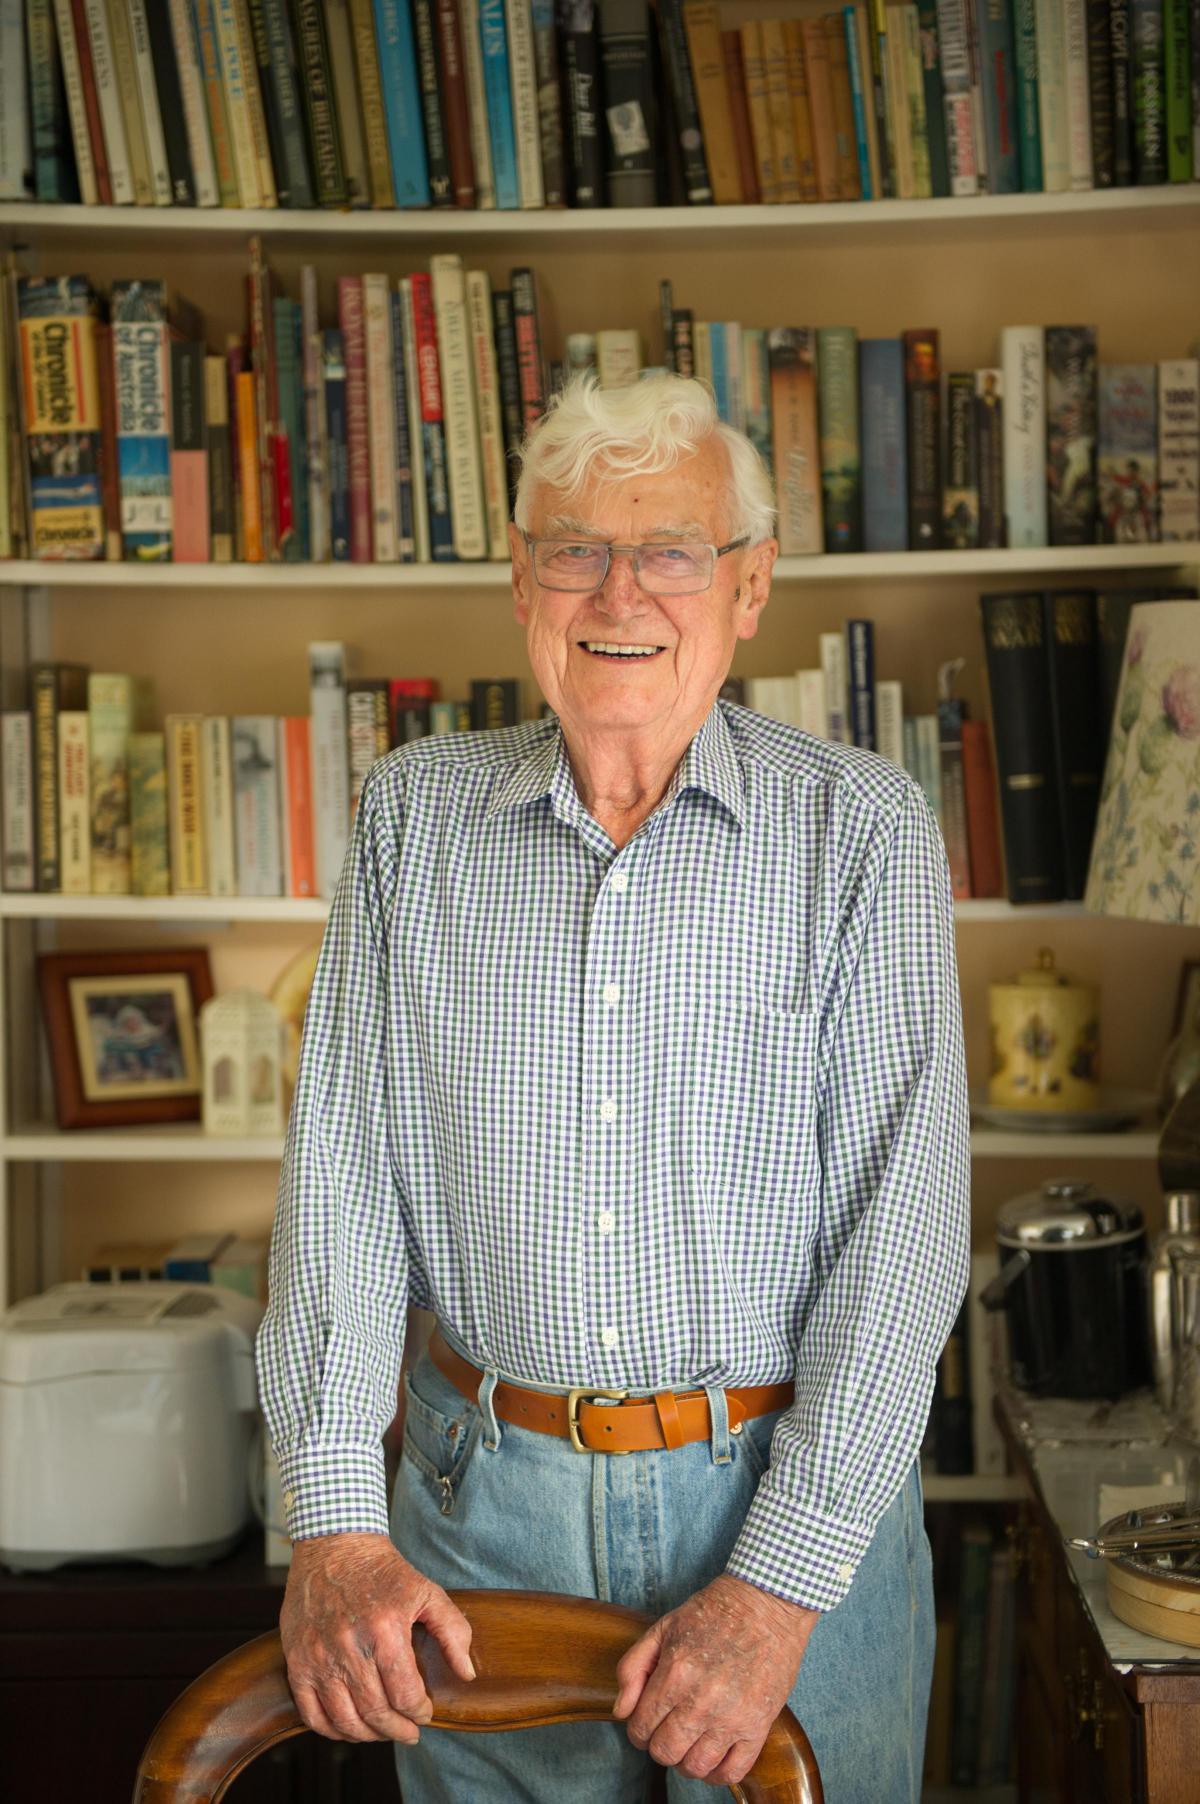 G.K. Robinson Exclaims His Joy of Becoming a Published Author Aged 90